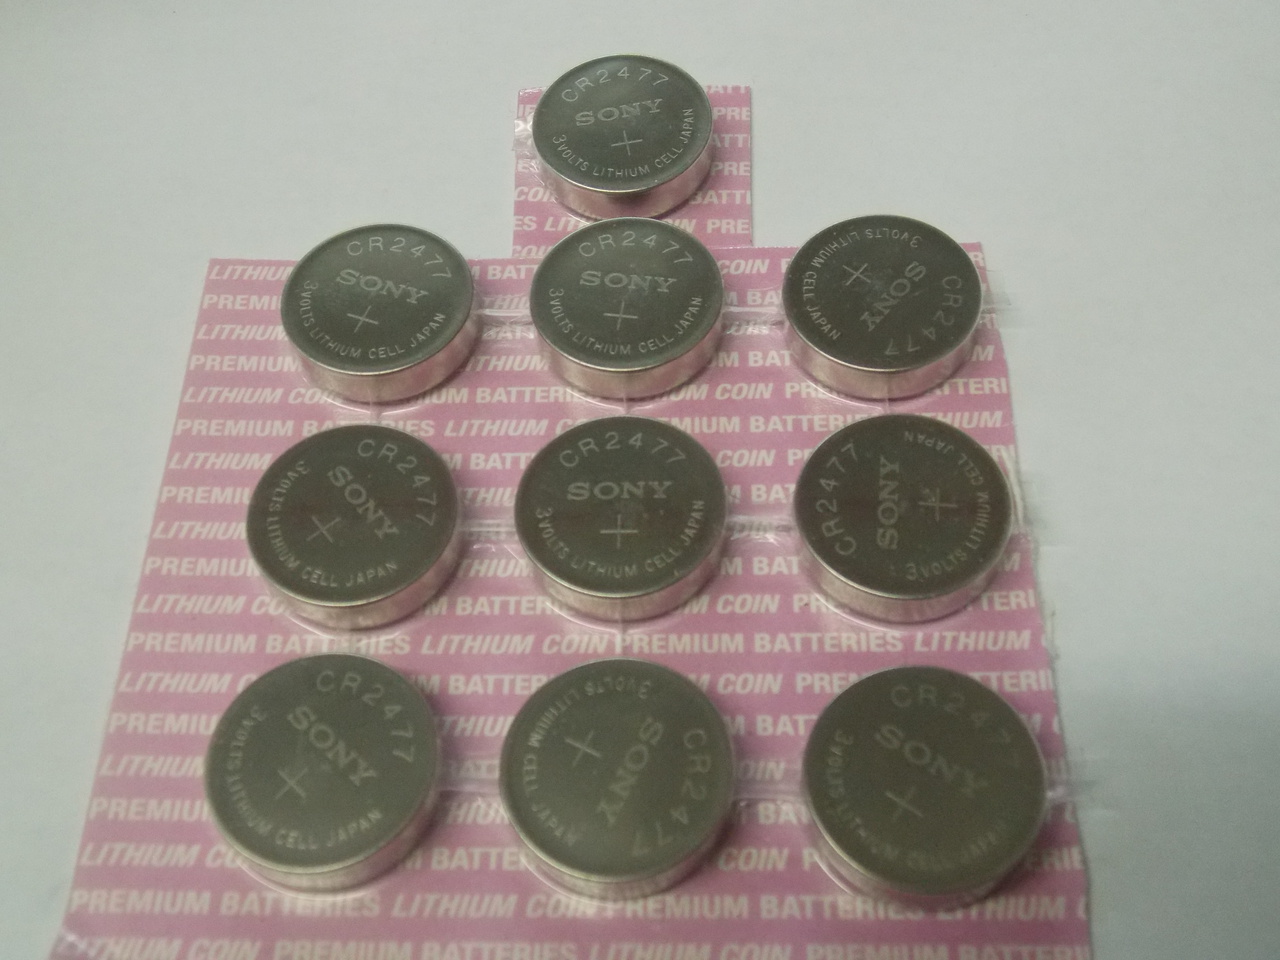 Sony CR2477 3V Lithium Coin Battery - 10 Pack + FREE SHIPPING!